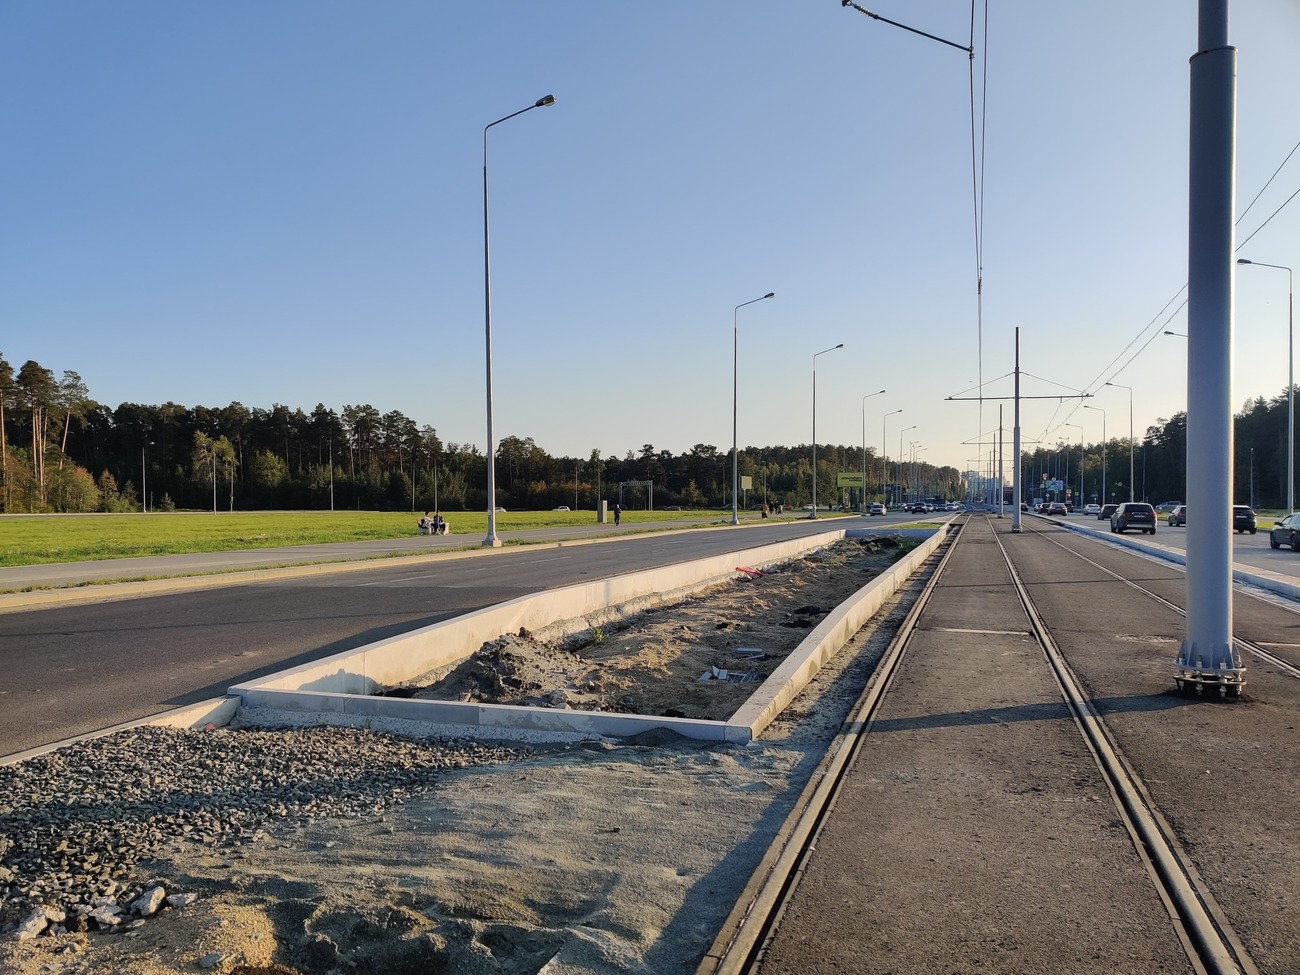 Yekaterinburg — The construction of a tram line to Akademichesky